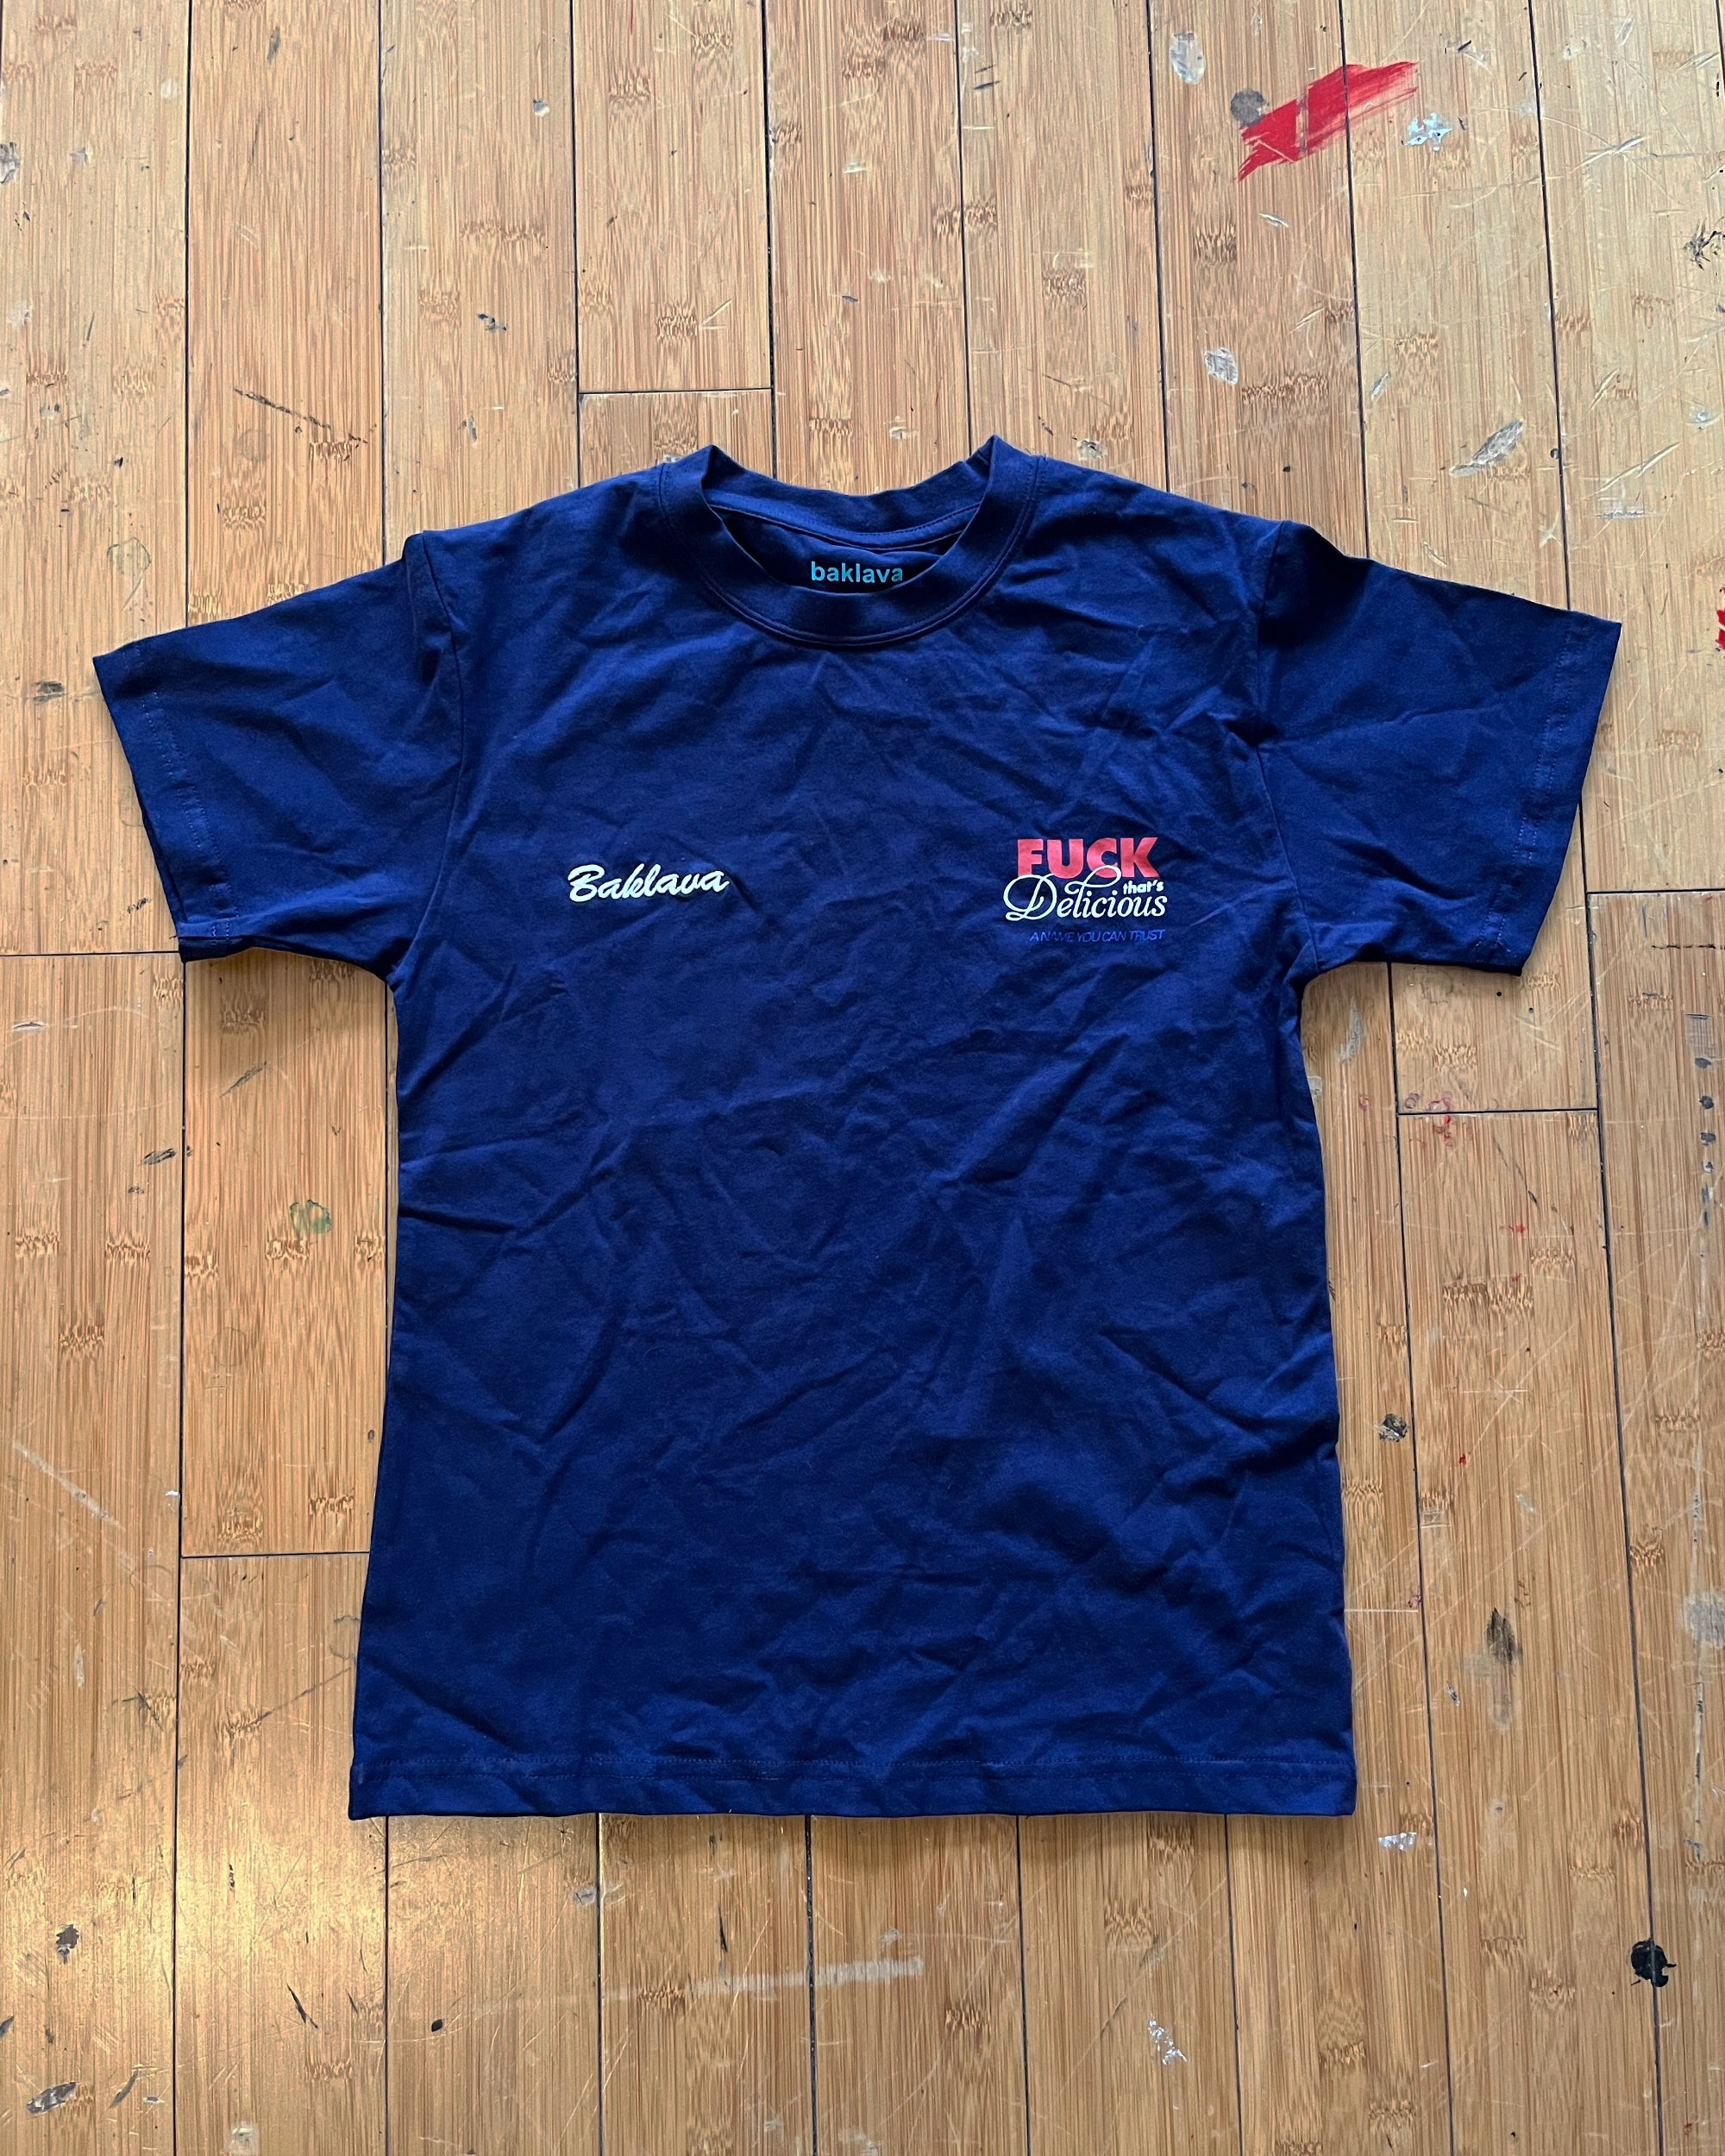 FTD "A NAME YOU CAN TRUST" TEE - NAVY